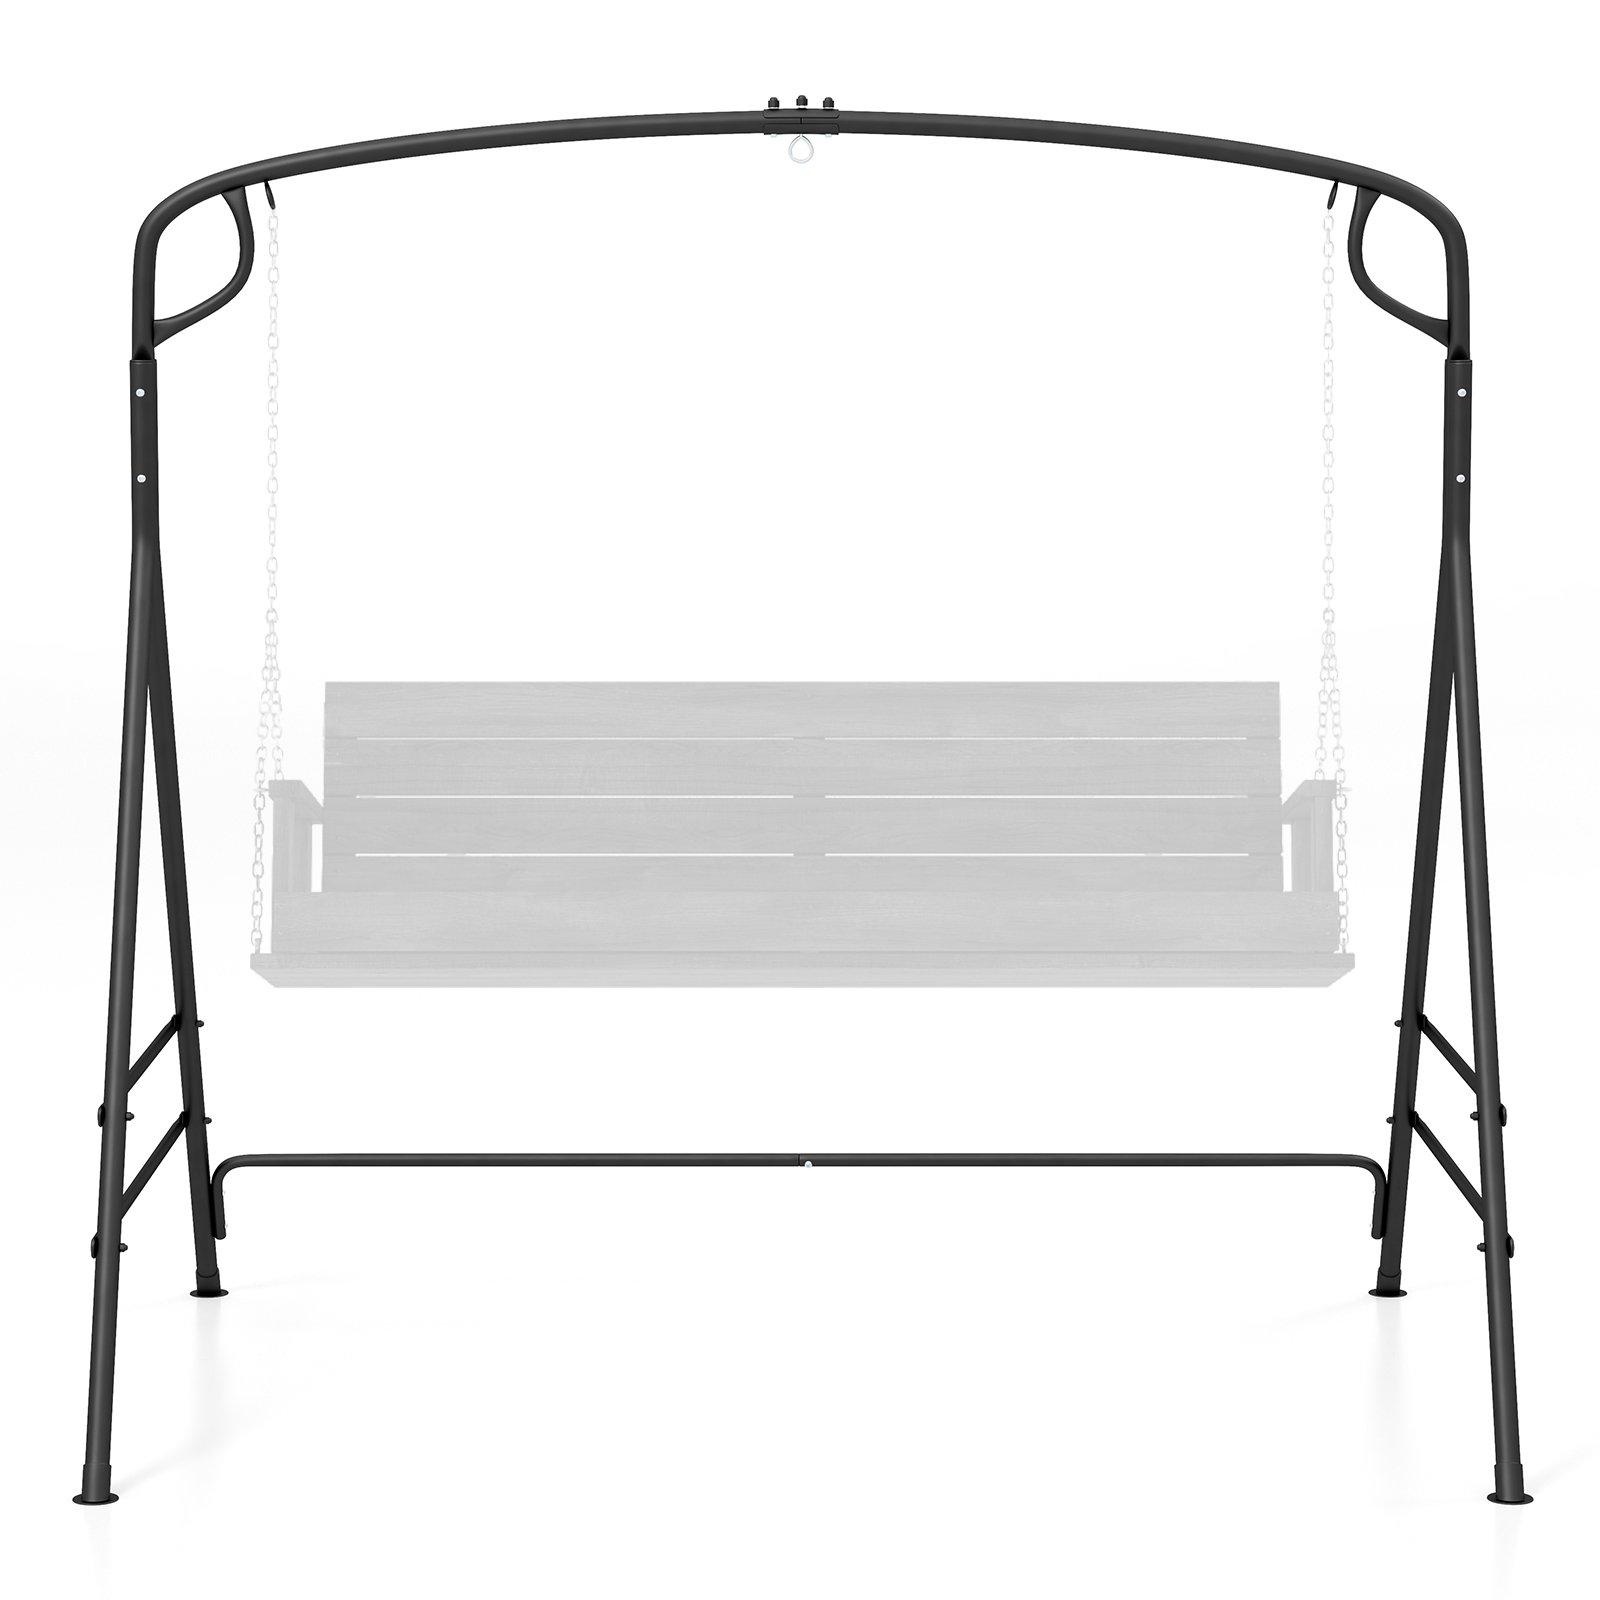 Outdoor Metal Swing Frame Sturdy A-Shaped Porch Swing Stand w/ Extra Side Bars